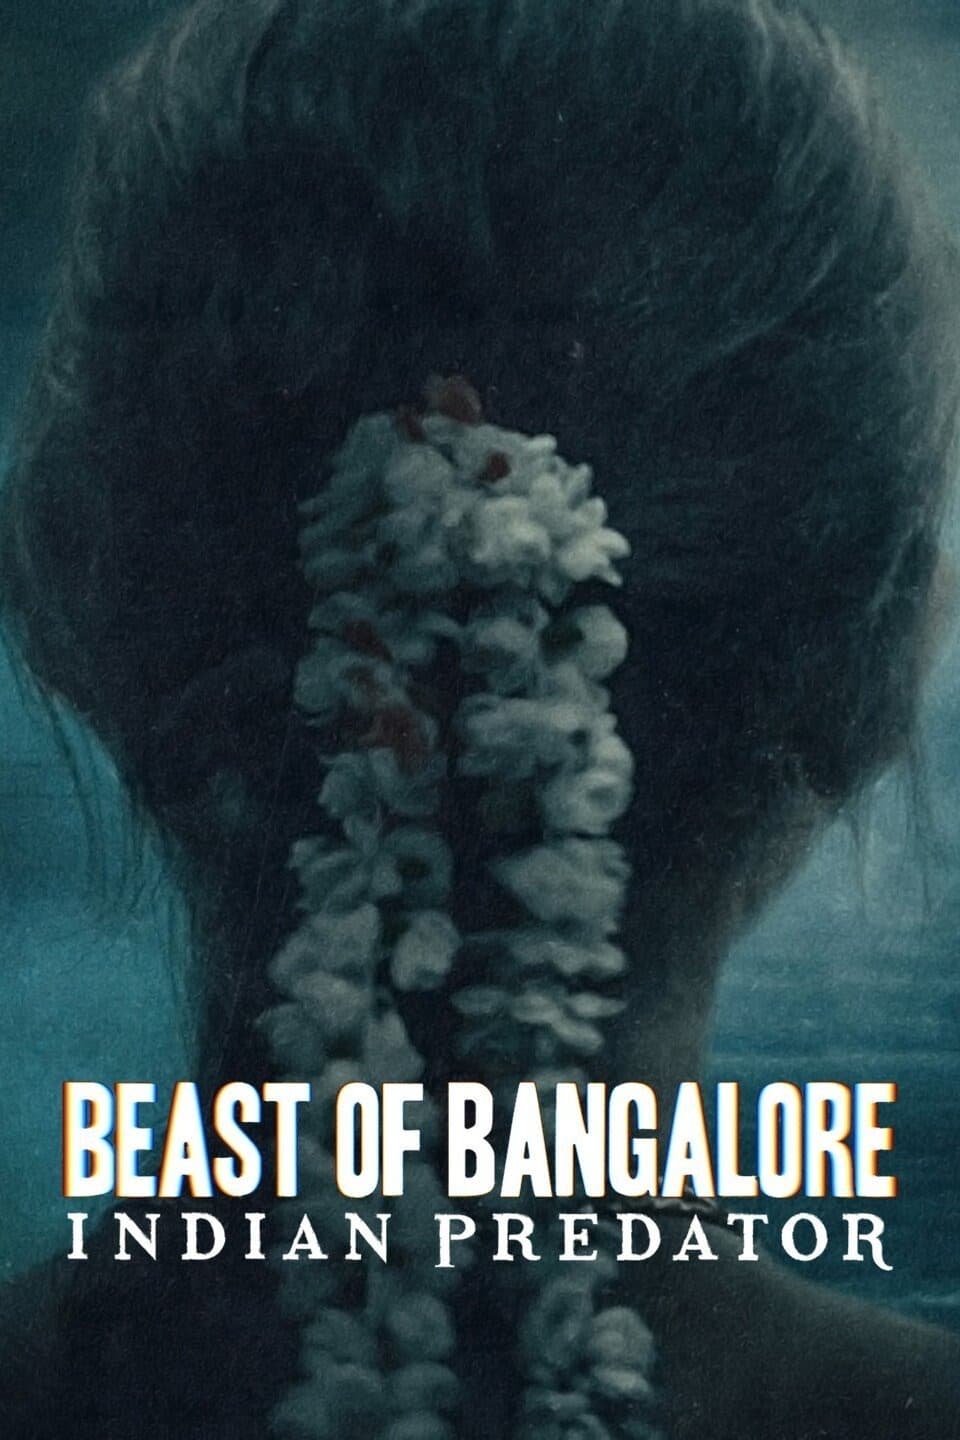 Beast of Bangalore: Indian Predator TV Shows About Miniseries